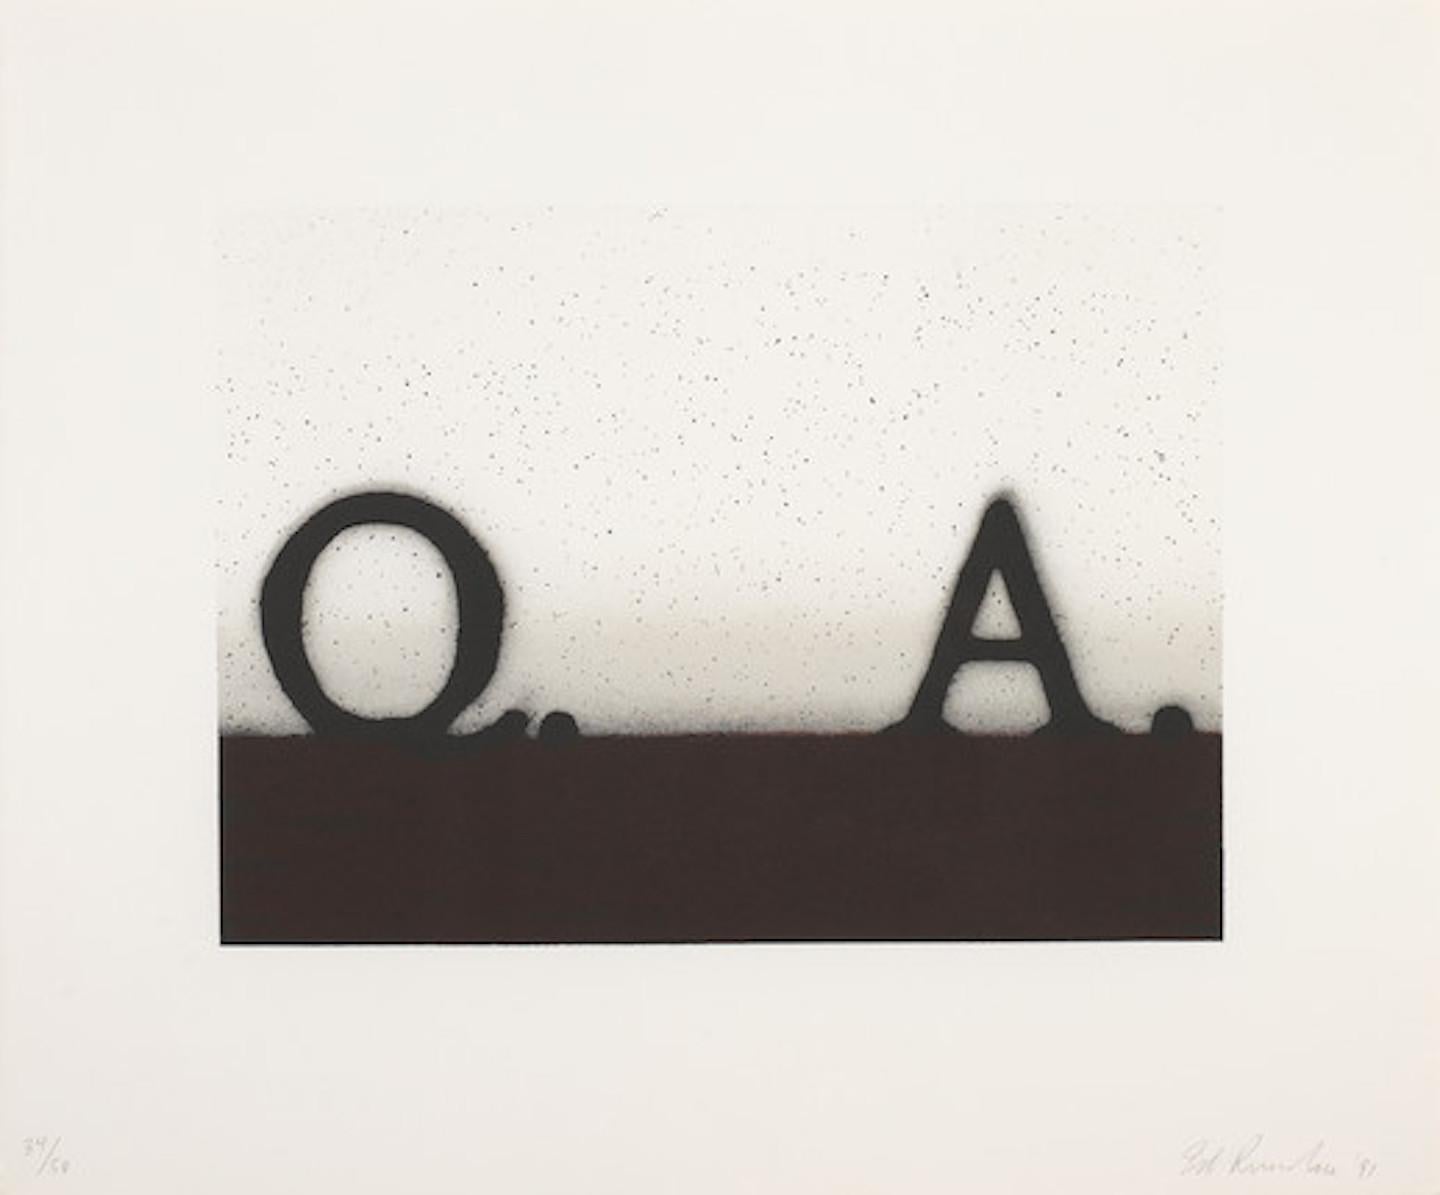 ED RUSCHA (1937-Present)

Ed Ruscha's piece 'Question & Answer' is a lithograph printed in black, 1991, on Rives BFK, signed, dated and numbered 34/50 in pencil, printed by Hamilton Press, California, published by Creative Works Editions, Japan,